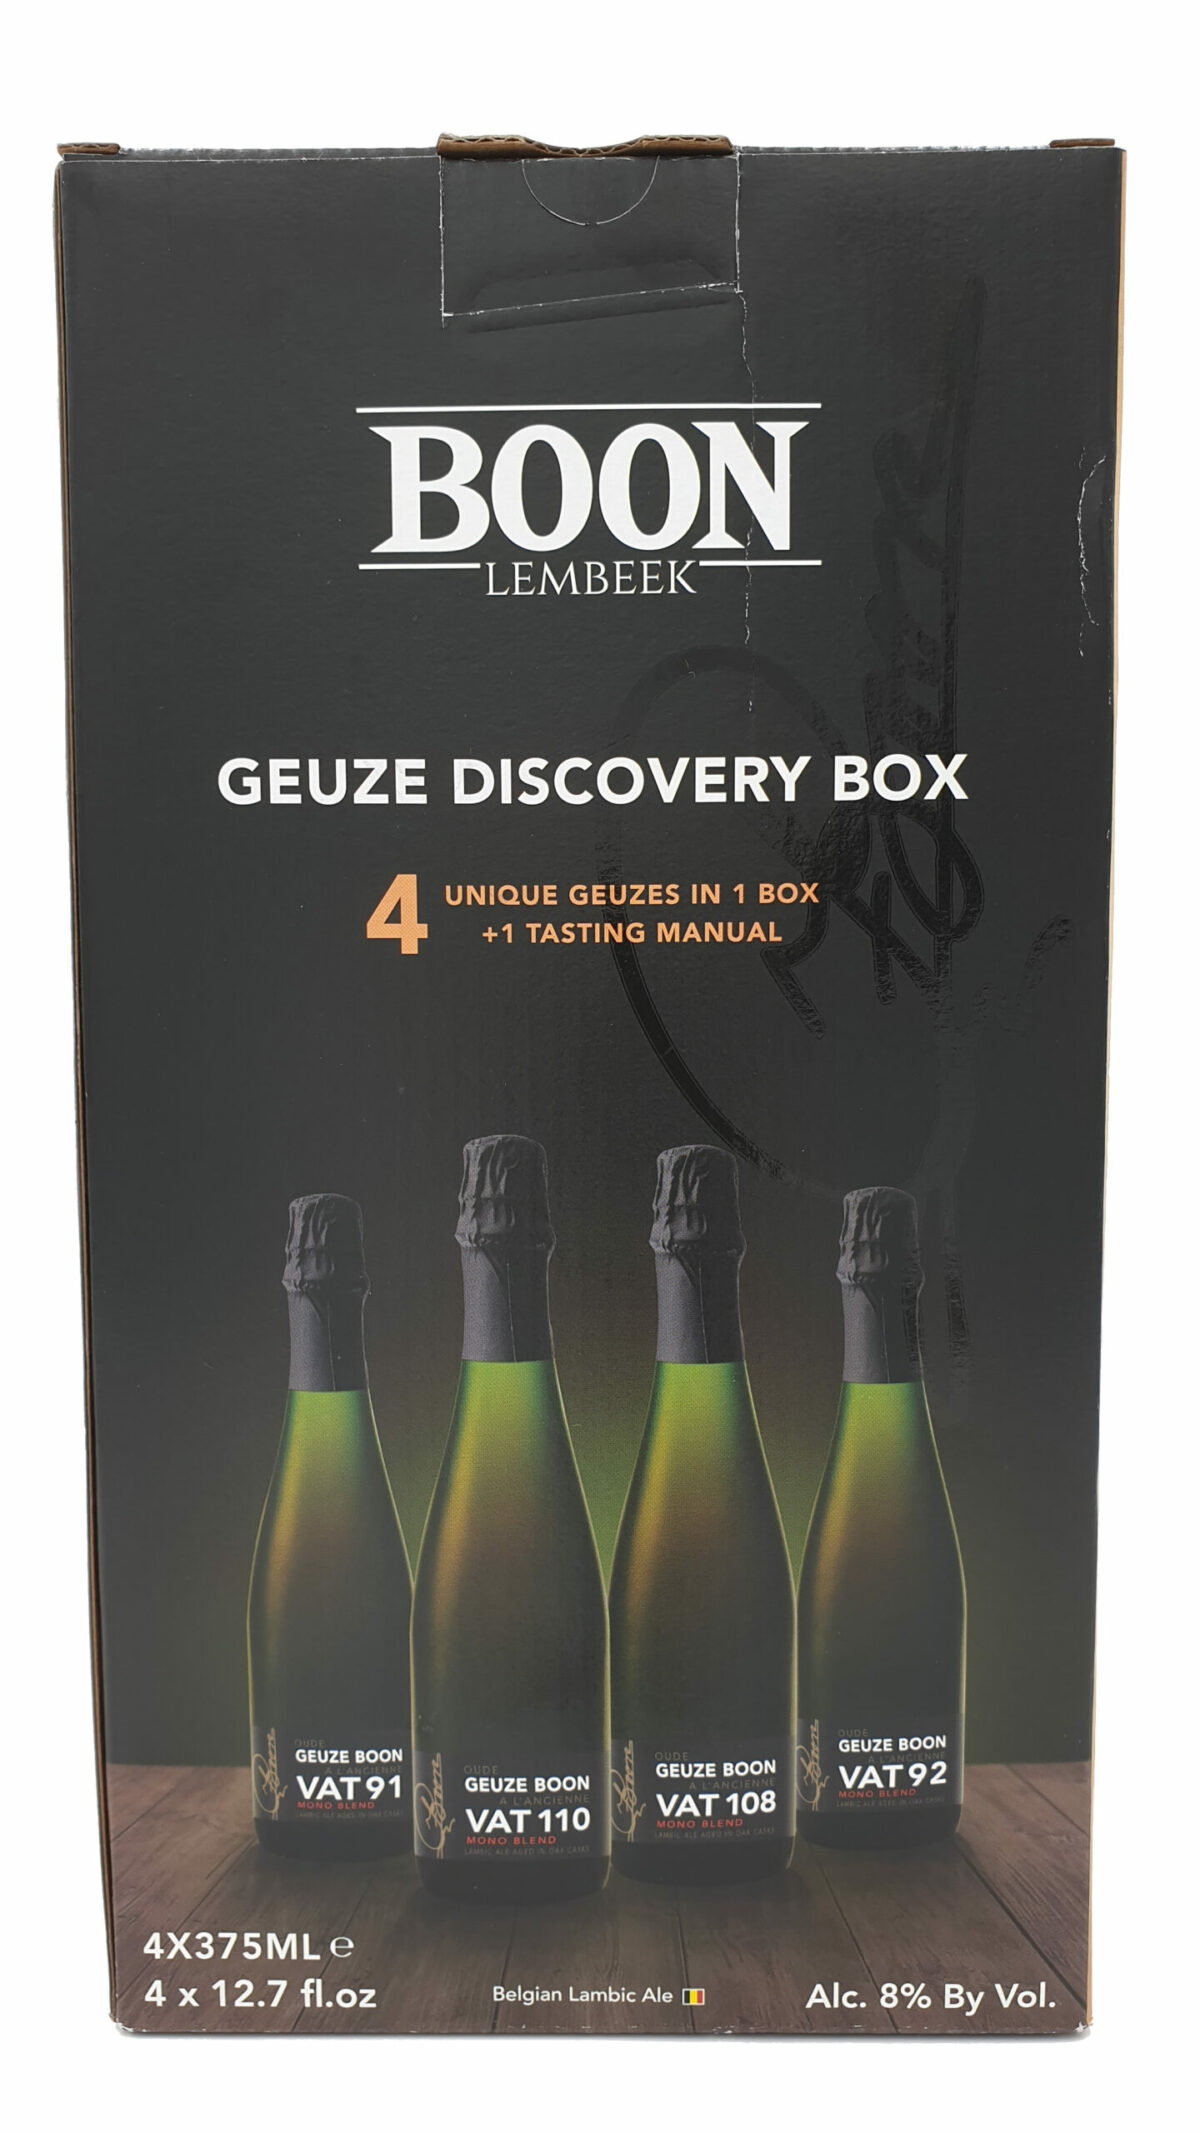 boon oude geuze vat discovery box